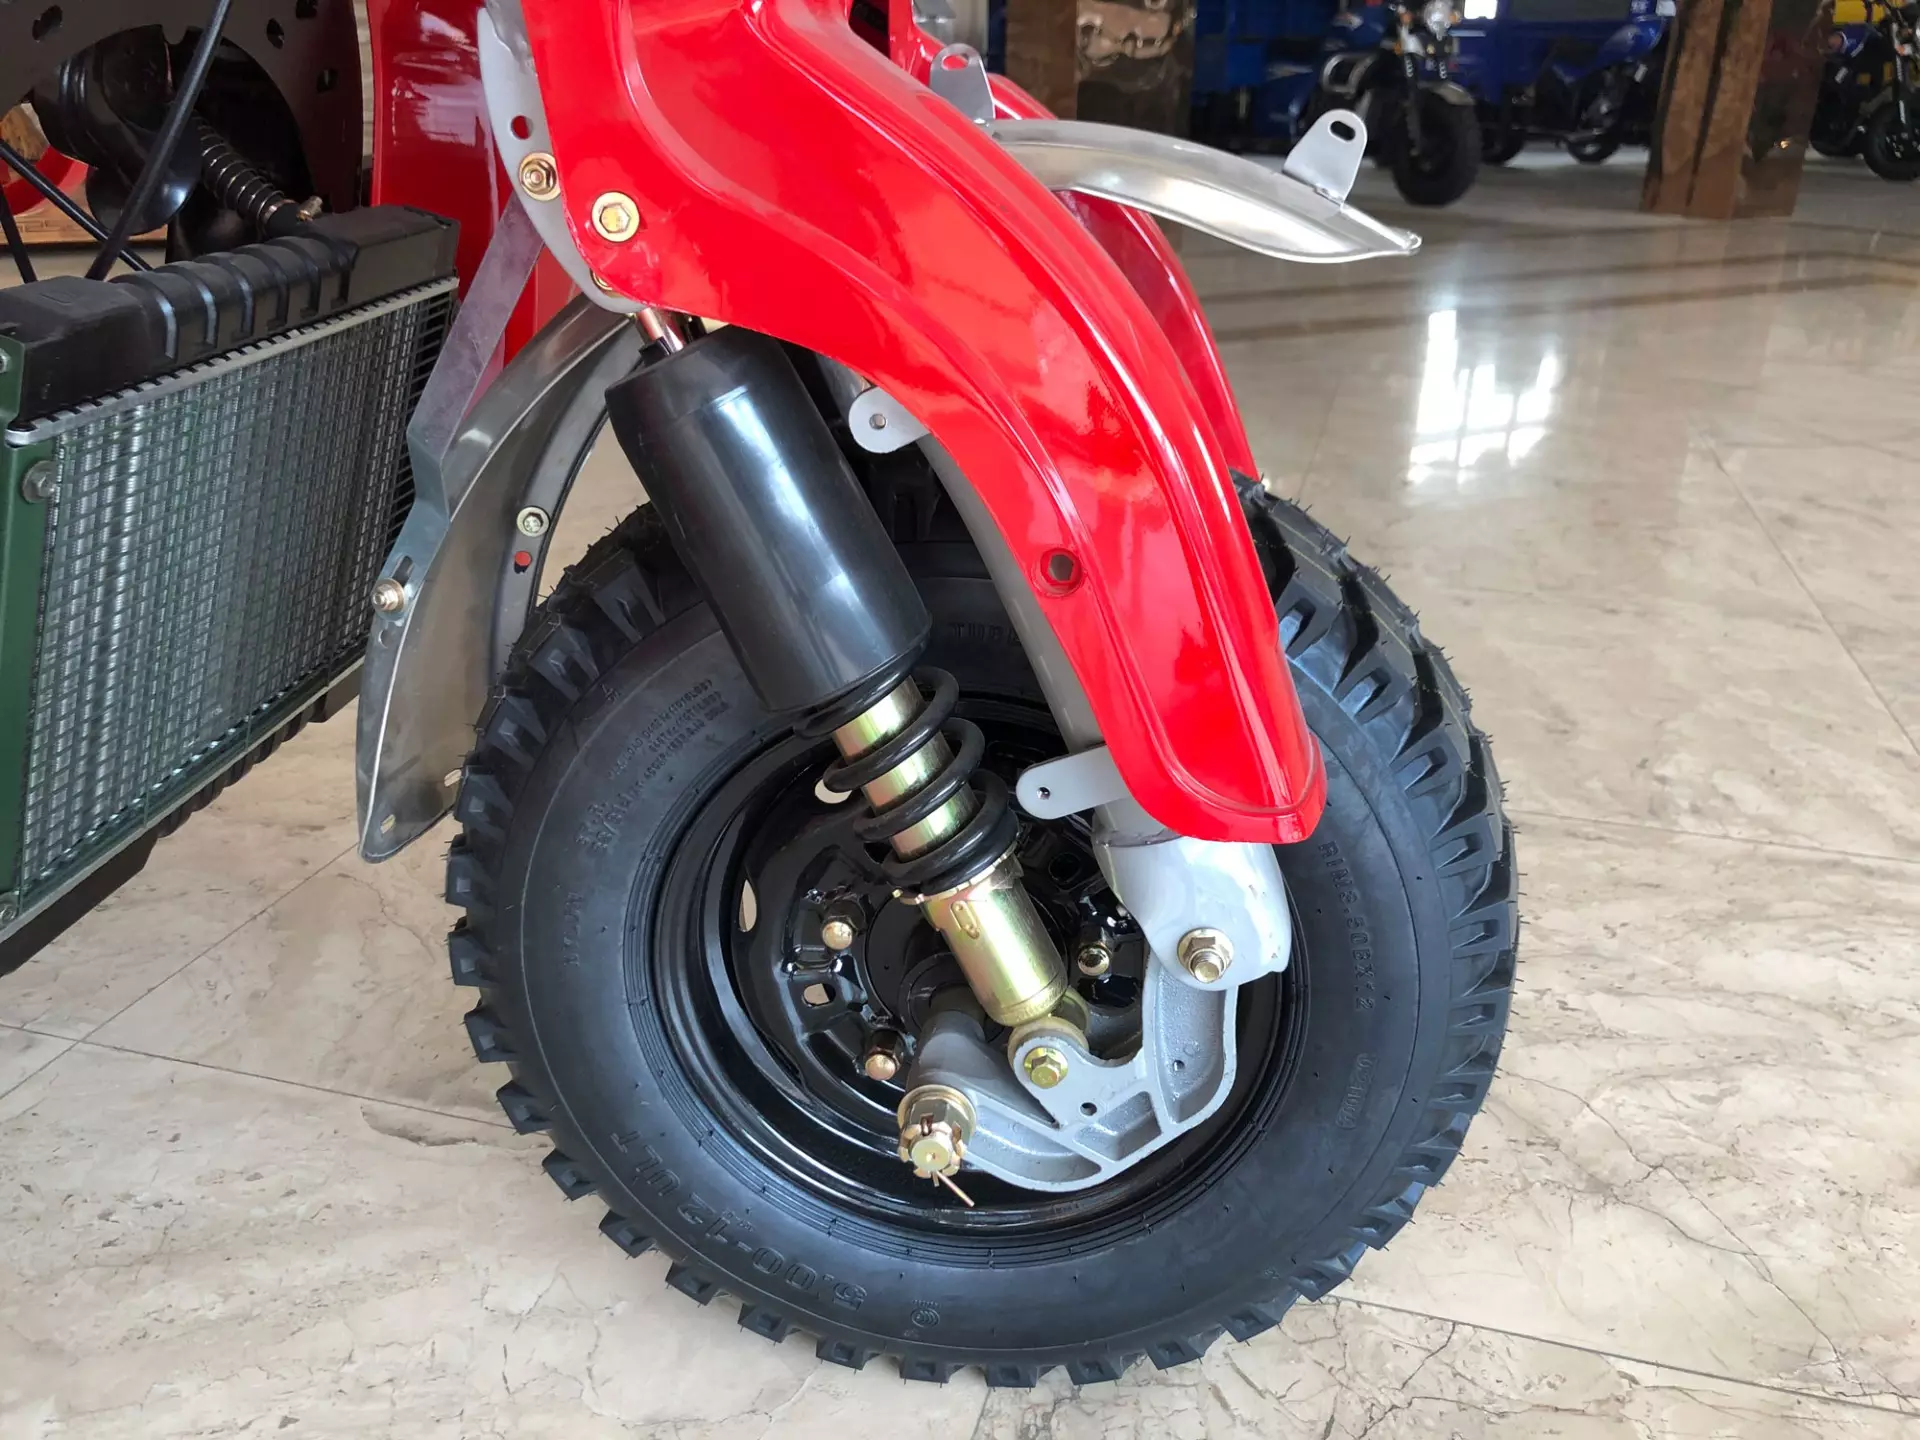 DAYANG 200CC/250CC/300CC LIFAN ZongShen engine  truck tricycle motor 3 for sale in ghana 250cc motorized adult tricycles